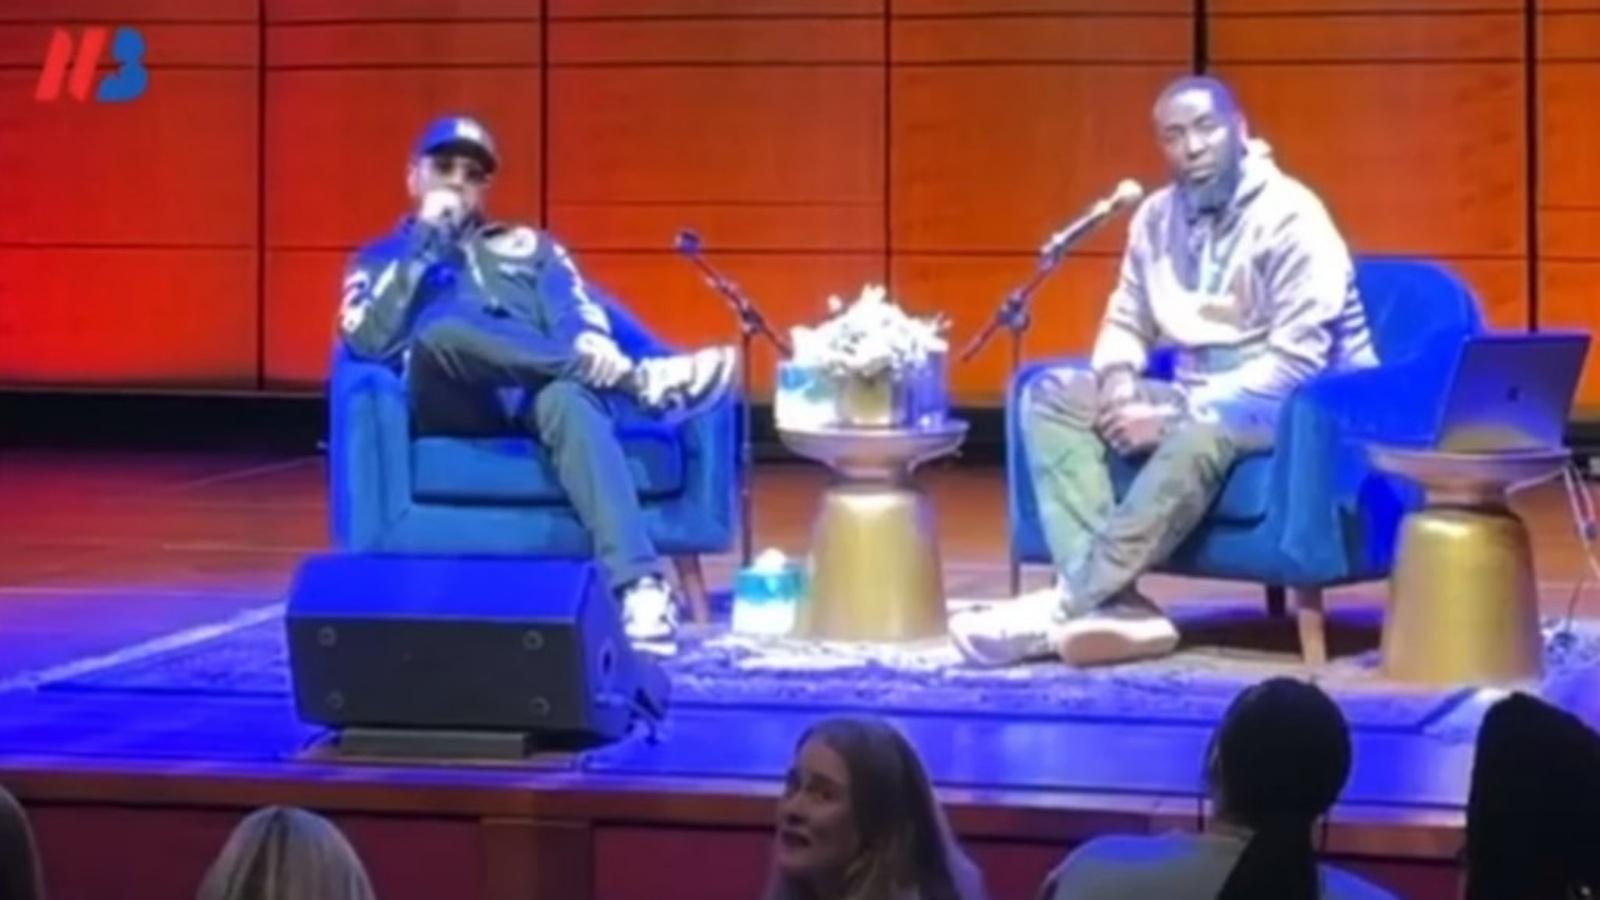 Producer Timbaland sitting on a stage answering questions.